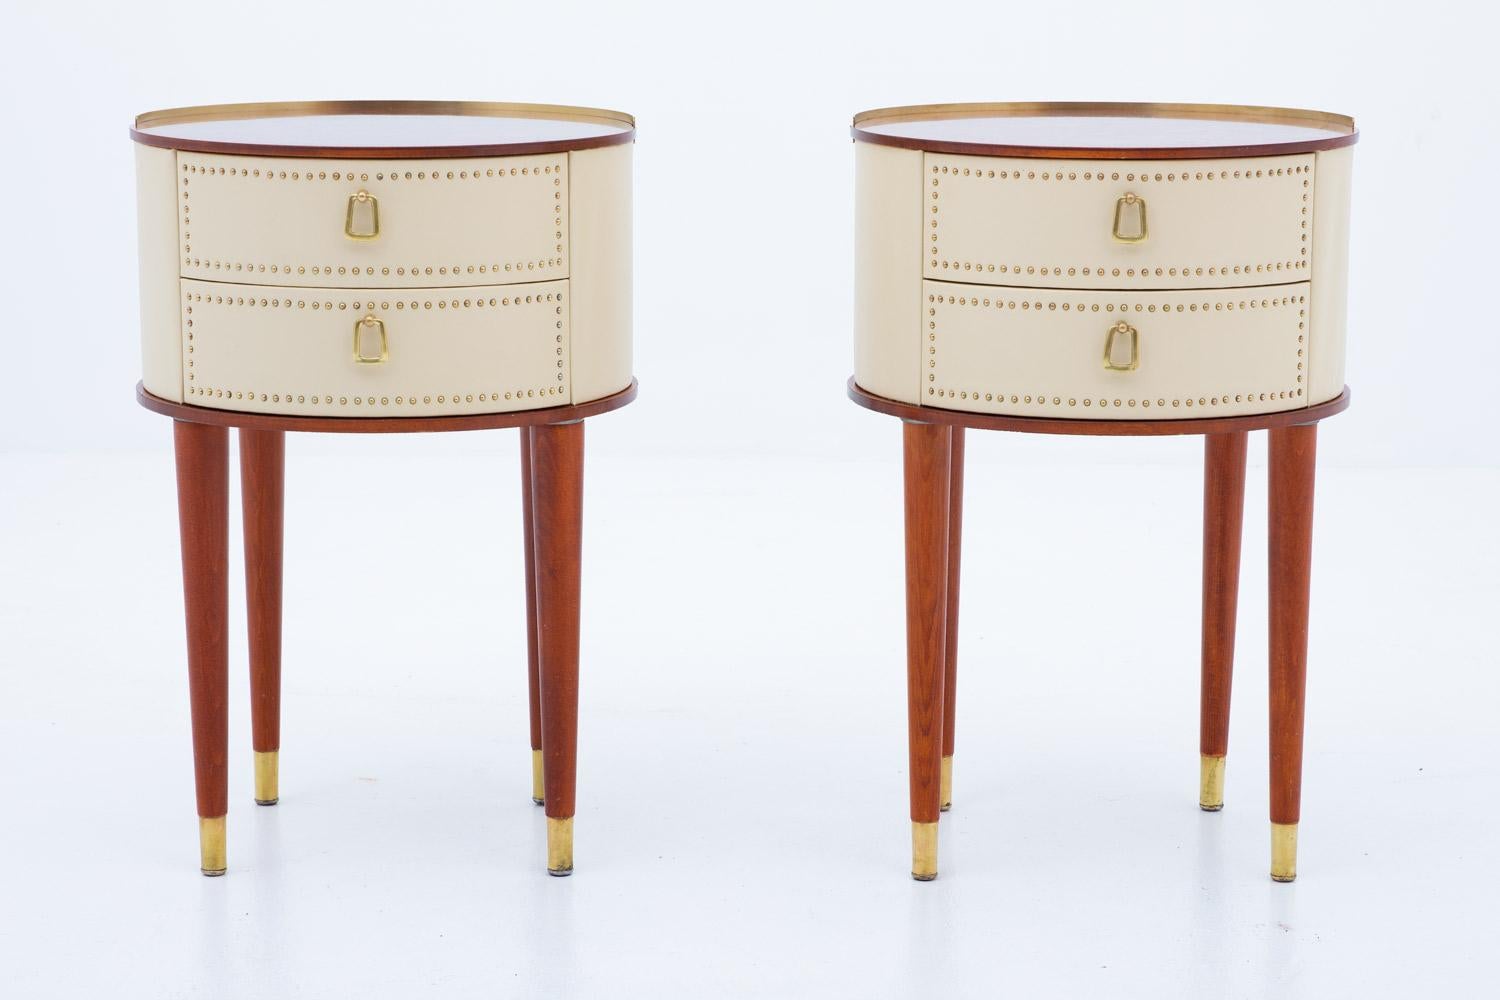 Midcentury bedside tables designed by Halvdan Pettersson for Tibro Möbelfabrik, circa 1940.
These round bedside tables are covered in cream white faux leather with brass details. The tabletop is made of mahogany and the legs of stained